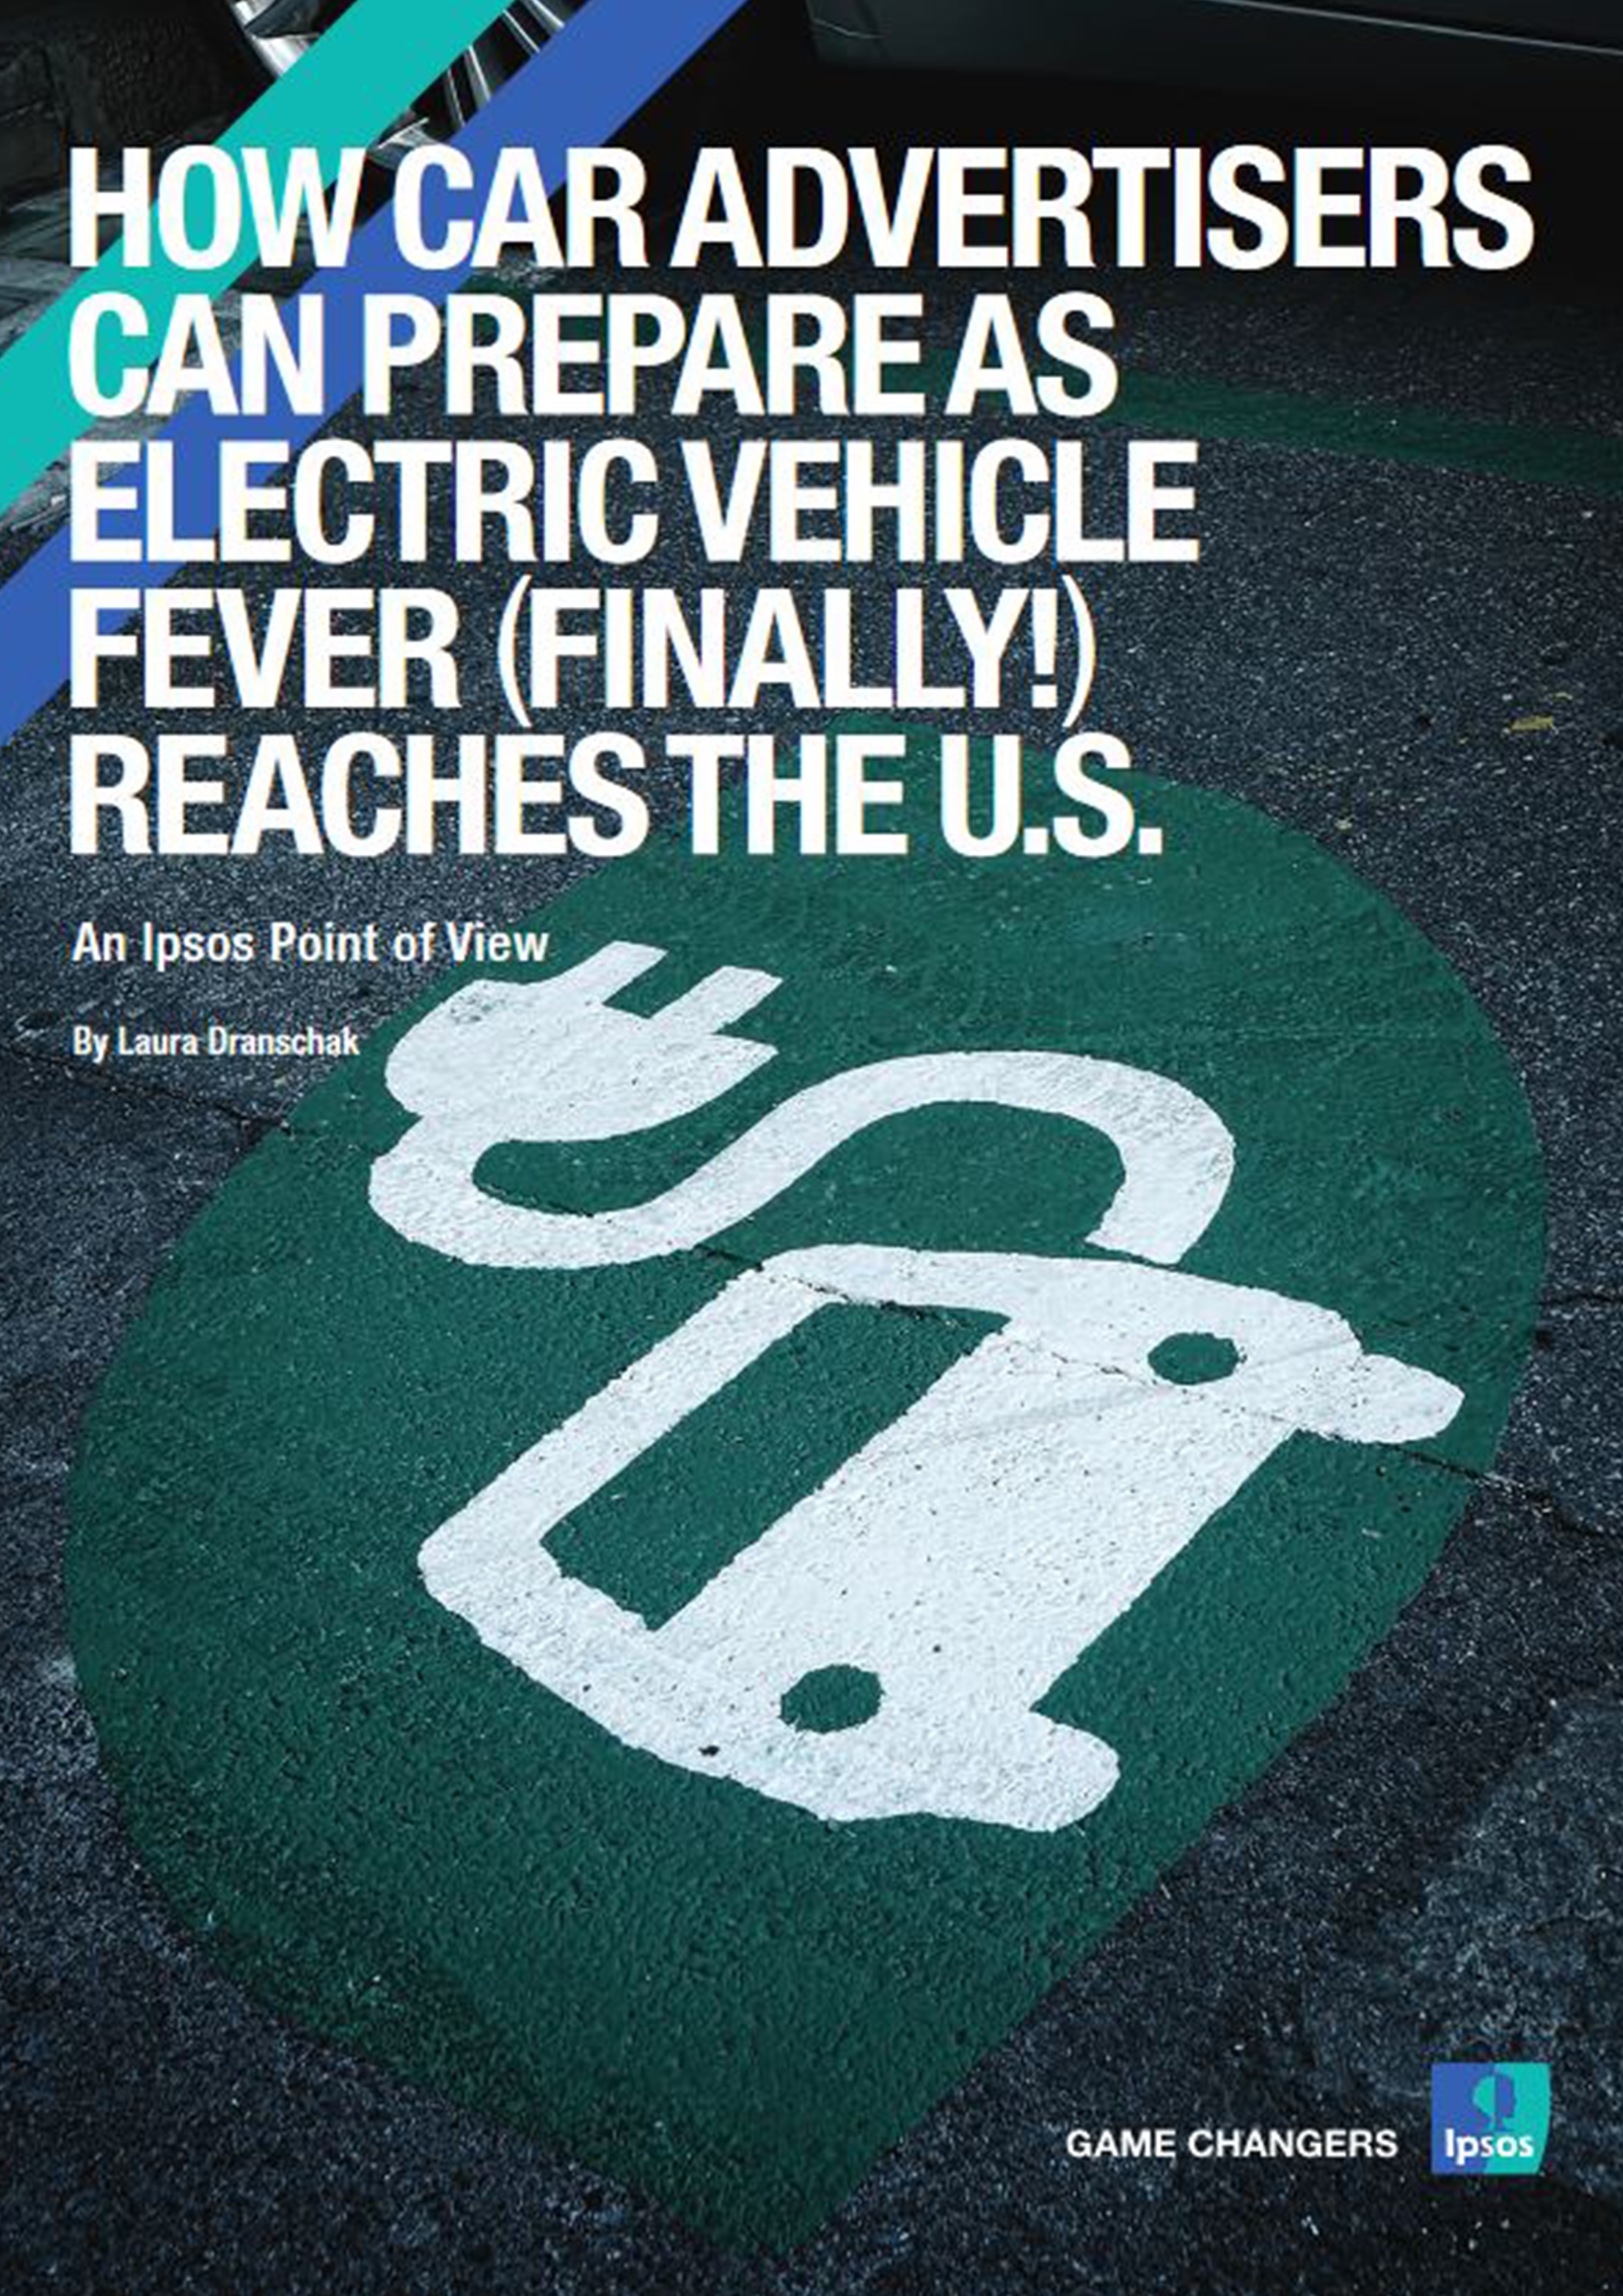 How car advertisers can prepare as electric vehicle fever reaches the U.S. | Ipsos